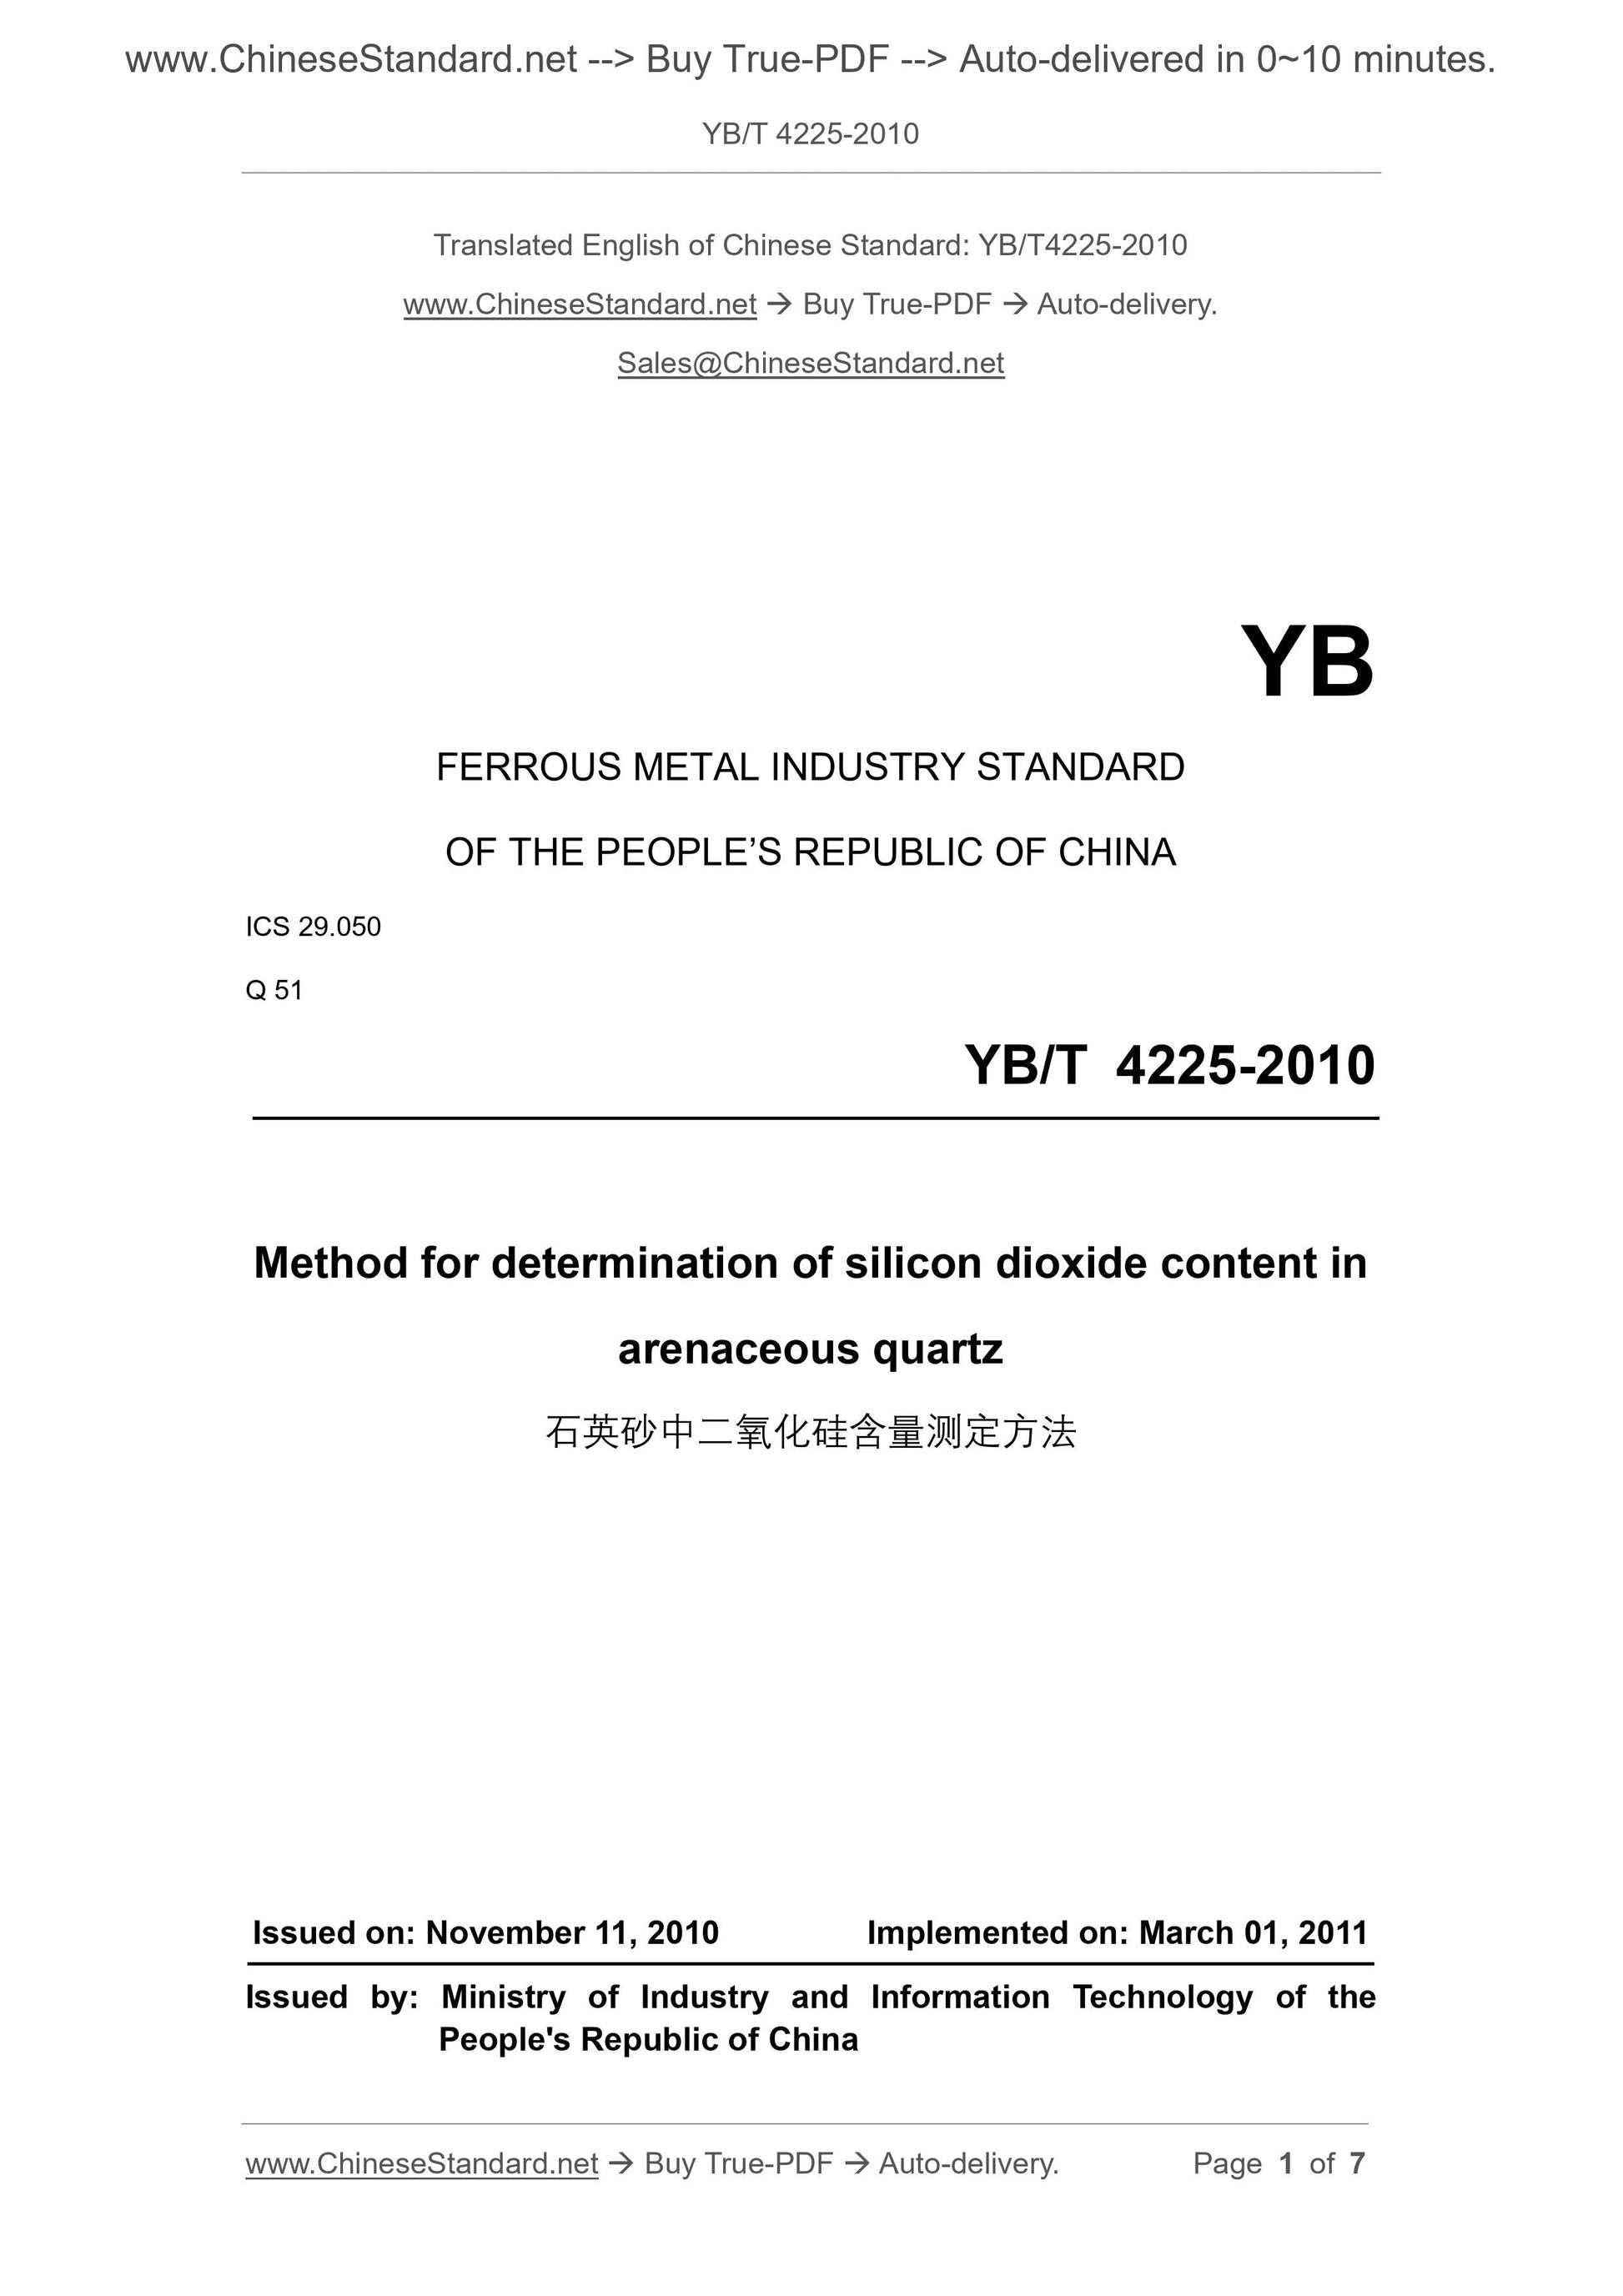 YB/T 4225-2010 Page 1